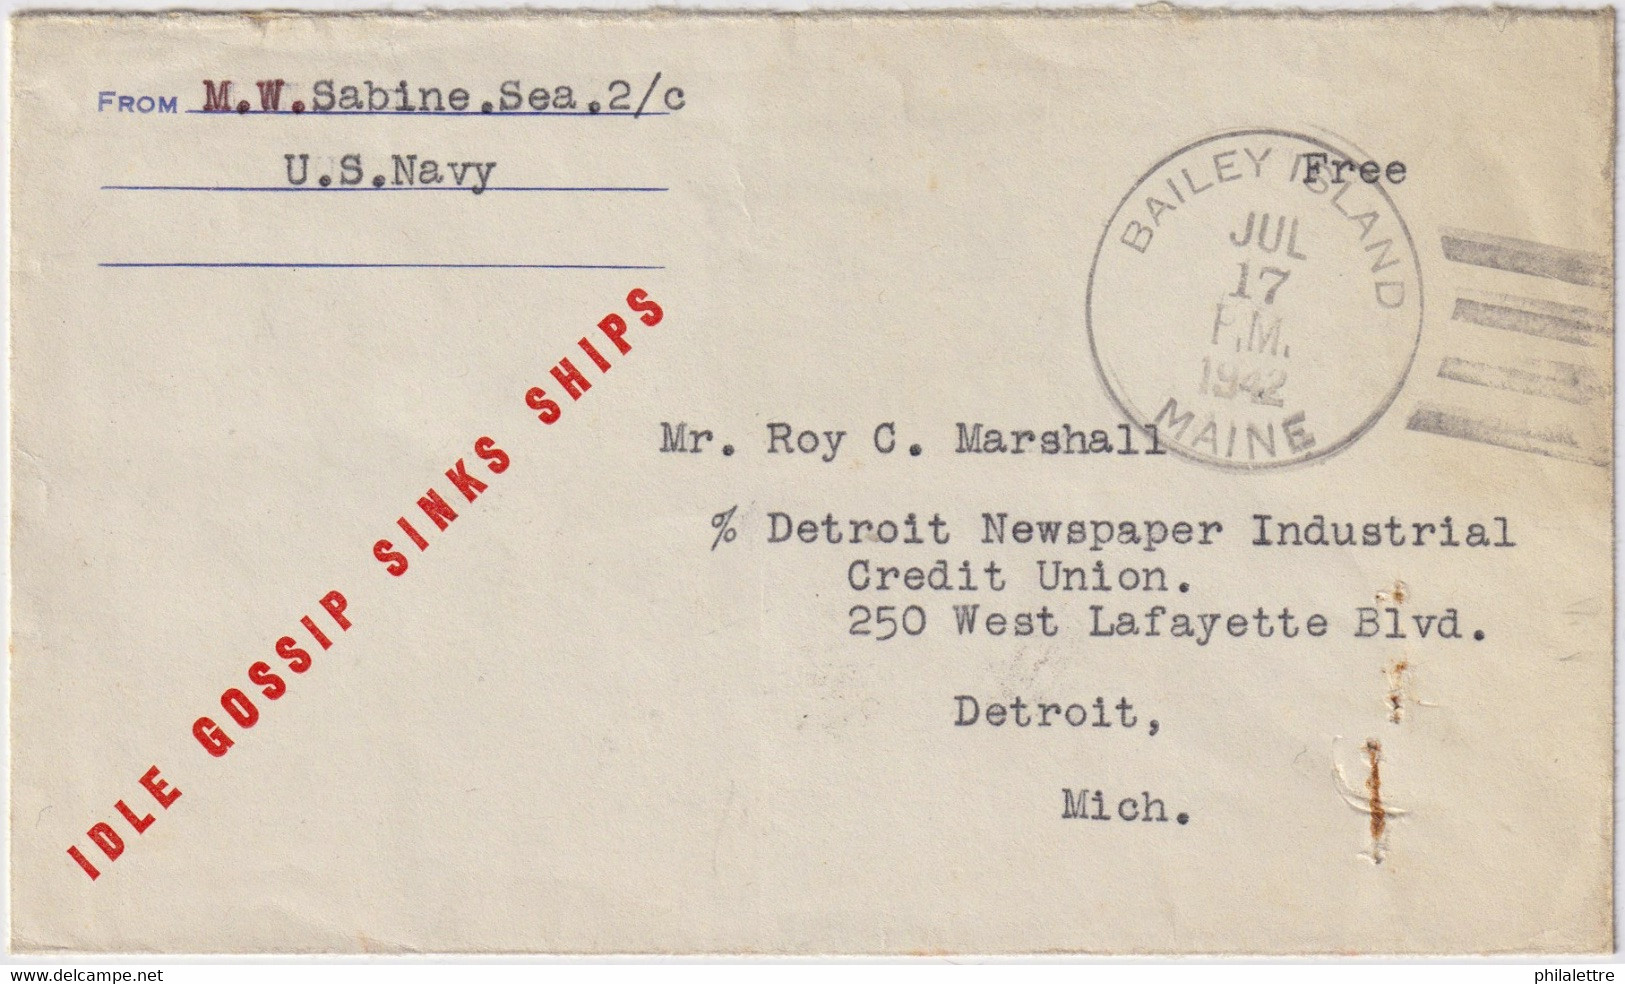 ÉTATS-UNIS / UNITED STATES - 1942 WWII NAVY Sailor's Mail Cover With "IDLE GOSSIP SINKS SHIPS" Slogan From BAILEY ISLAND - Lettres & Documents